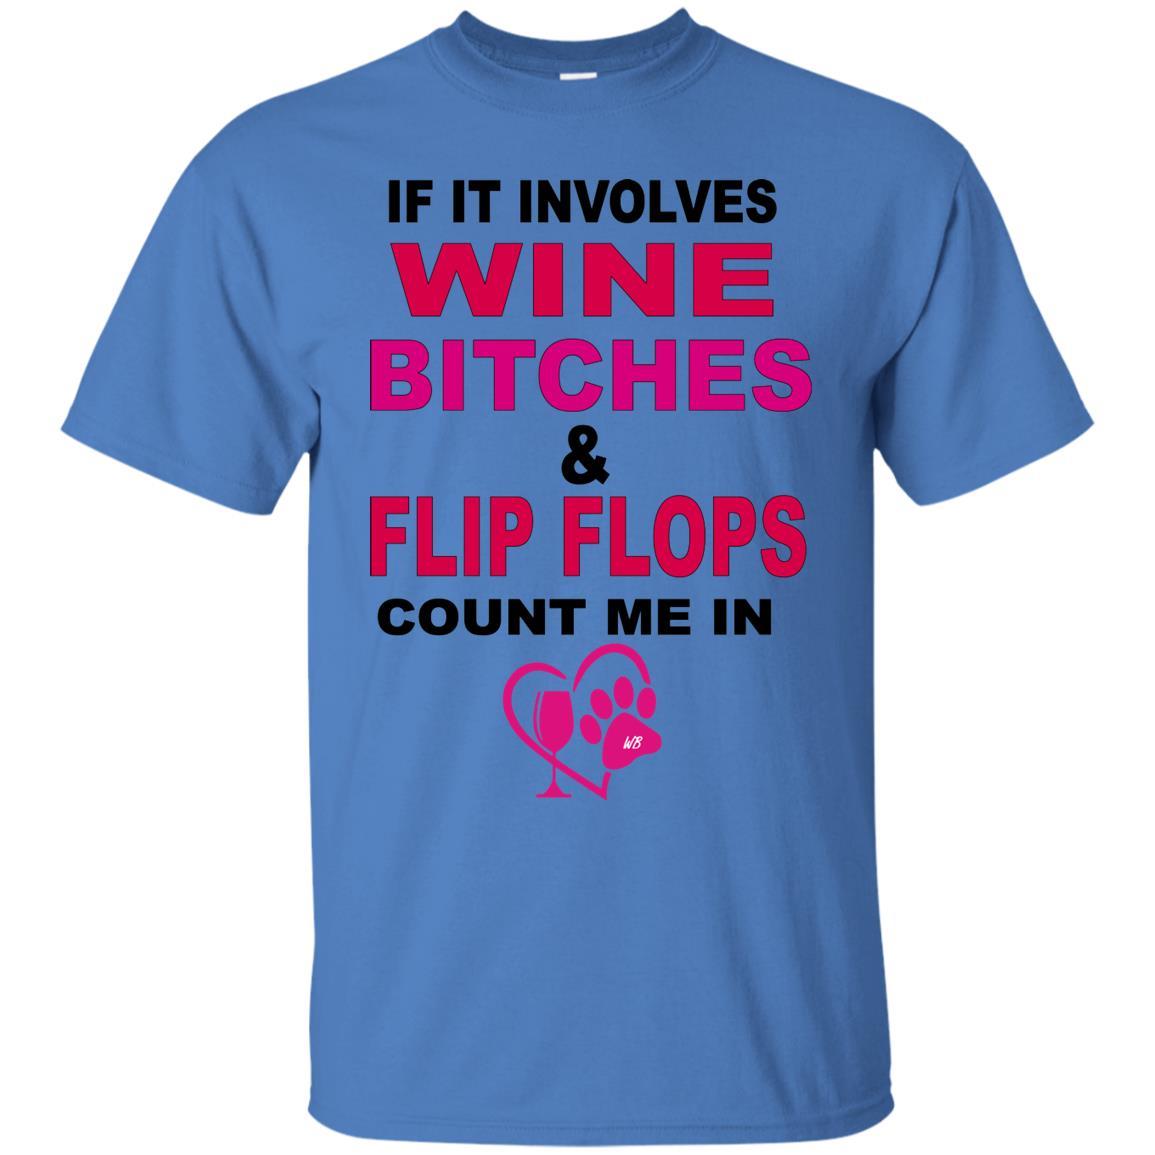 T-Shirts Iris / S WineyBitches.co " If It Involves Wine Bitches & Flip Flops I'm In" Ultra Cotton Unisex T-Shirt WineyBitches.co Hilariously Funny T-Shirt for Wine & Dog Lovers   WineyBitchesCo